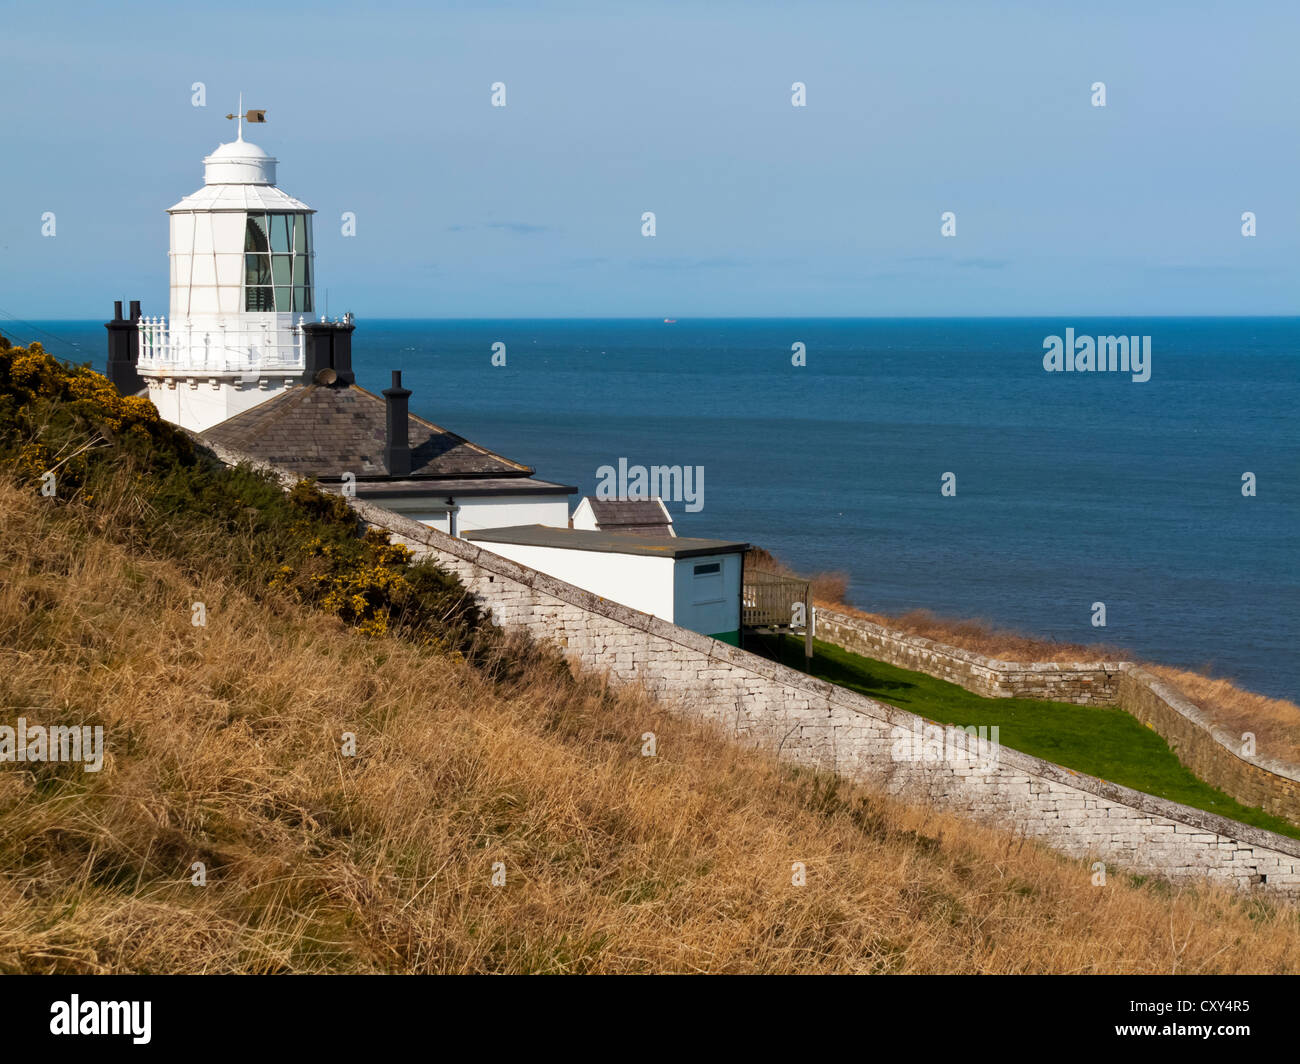 Whitby lighthouse or High Light on the coast south of Whitby in North Yorkshire England UK designed by James Walker built 1958 Stock Photo